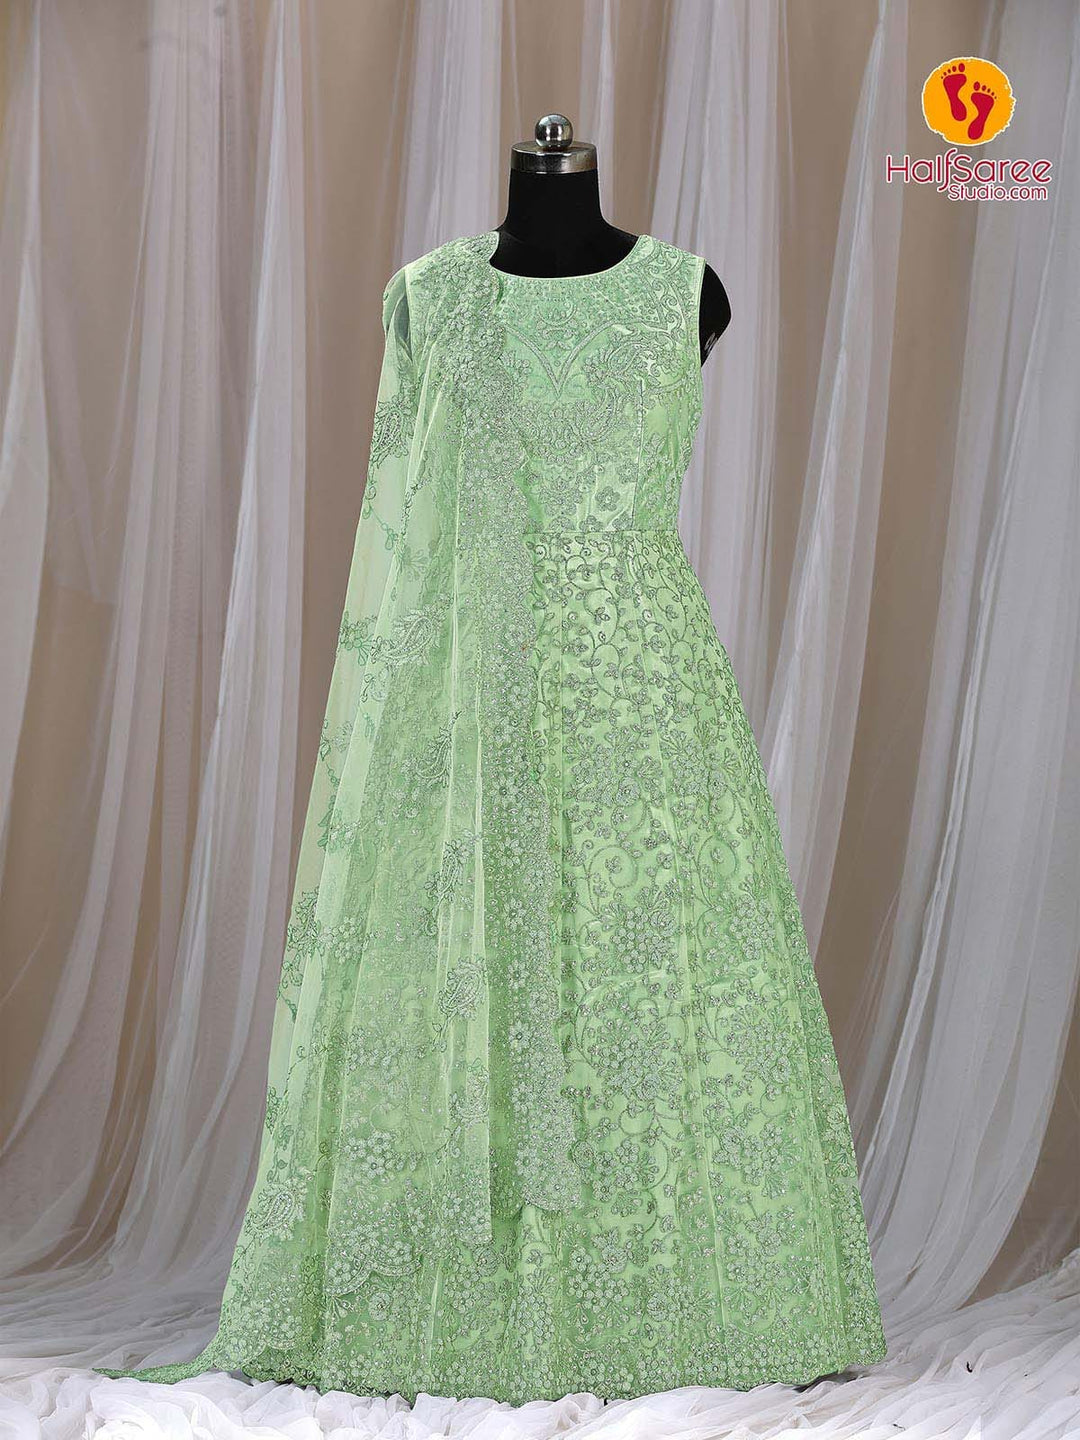 Black Dummy has dressed with Pista colour net embroidered gown